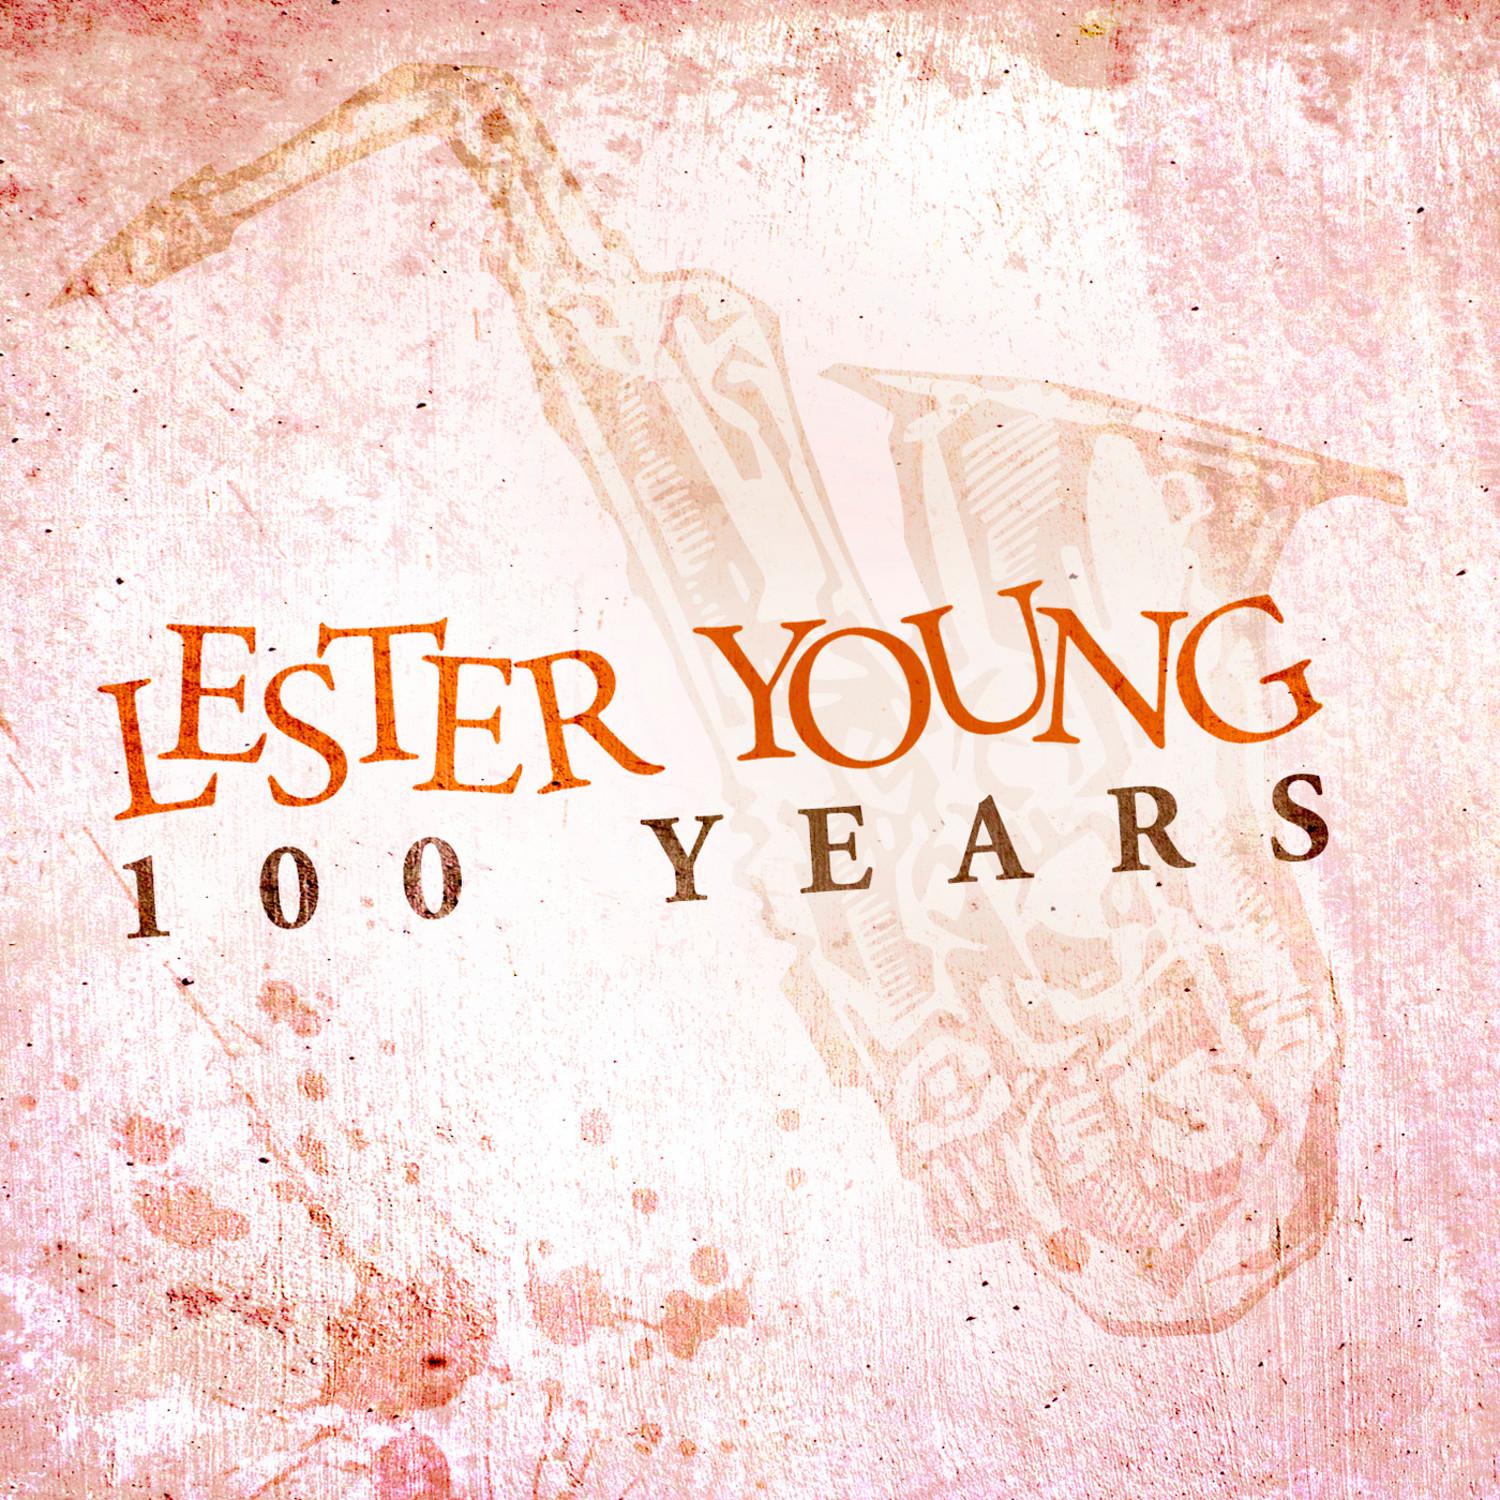 Lester Young 100 Years